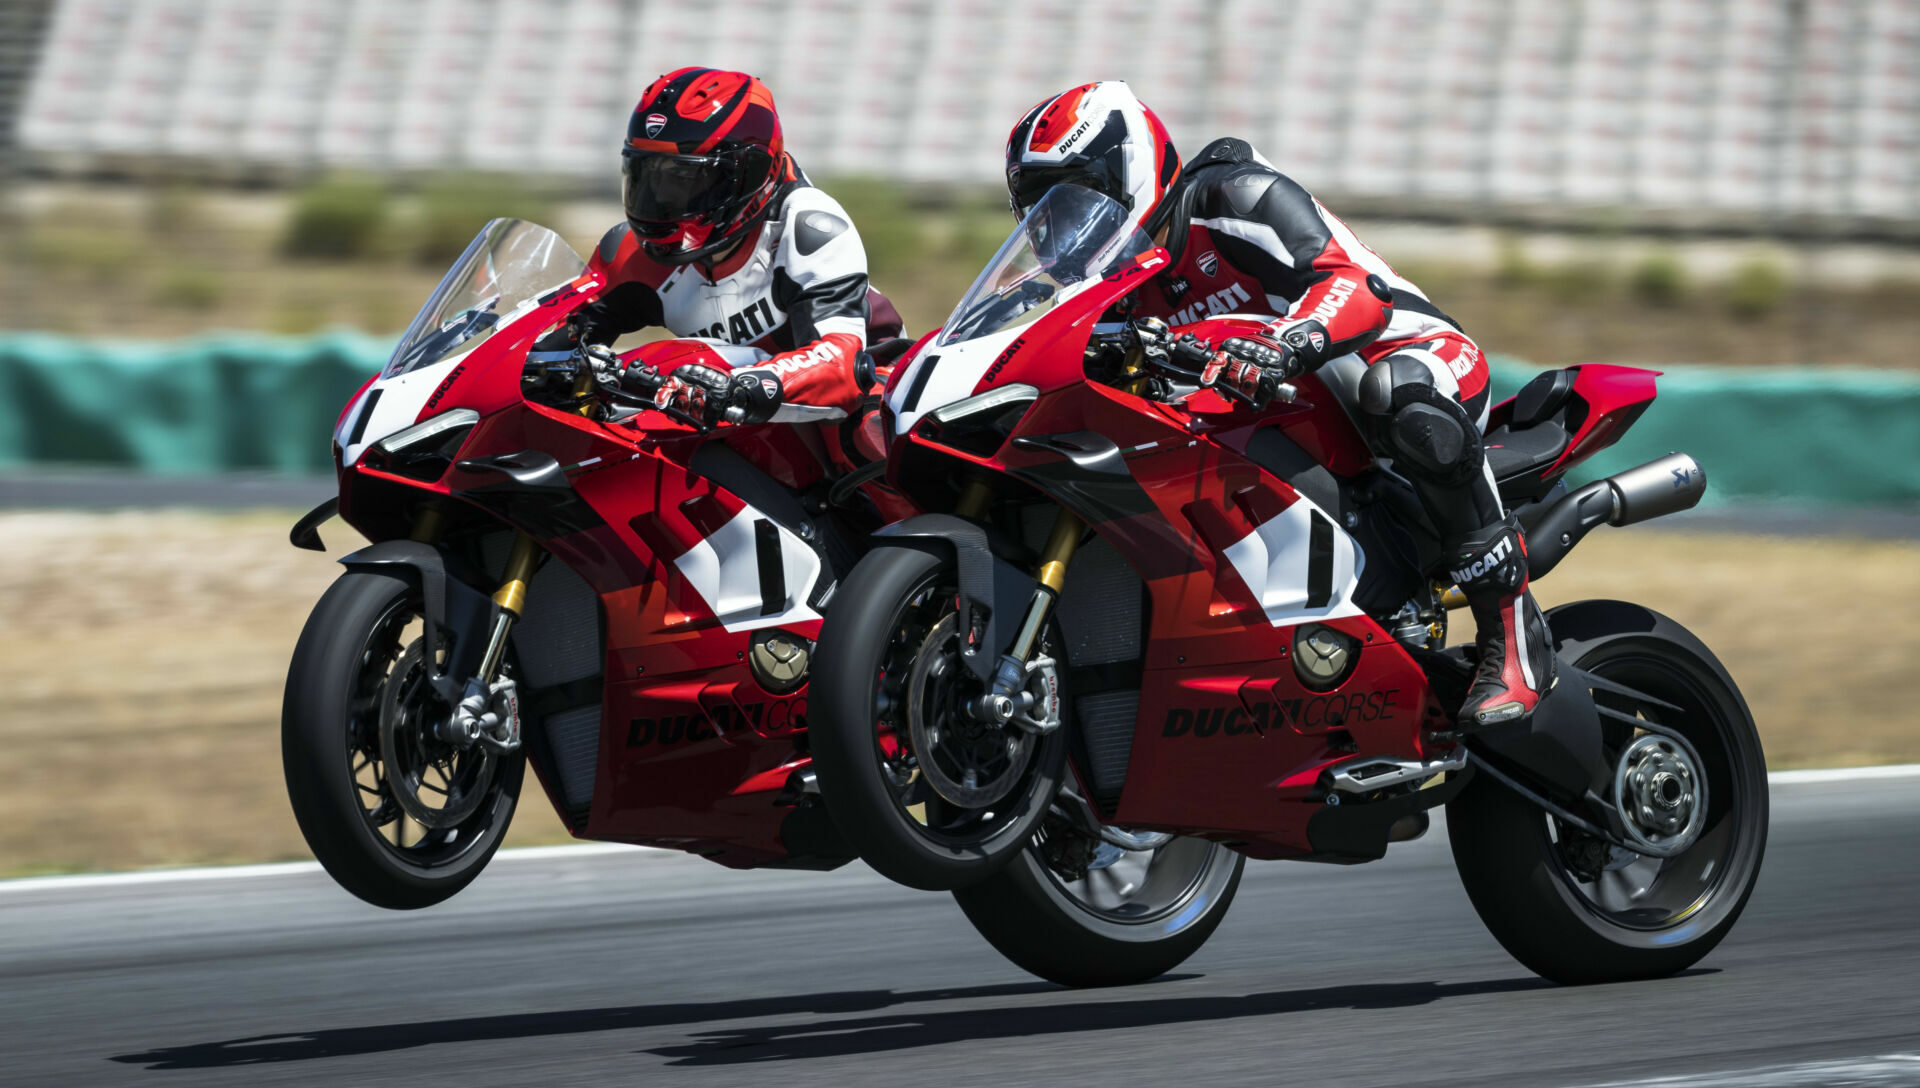 Two Ducati test riders at speed on track on 2023 Panigale V4 R sportbikes. Photo courtesy Ducati.